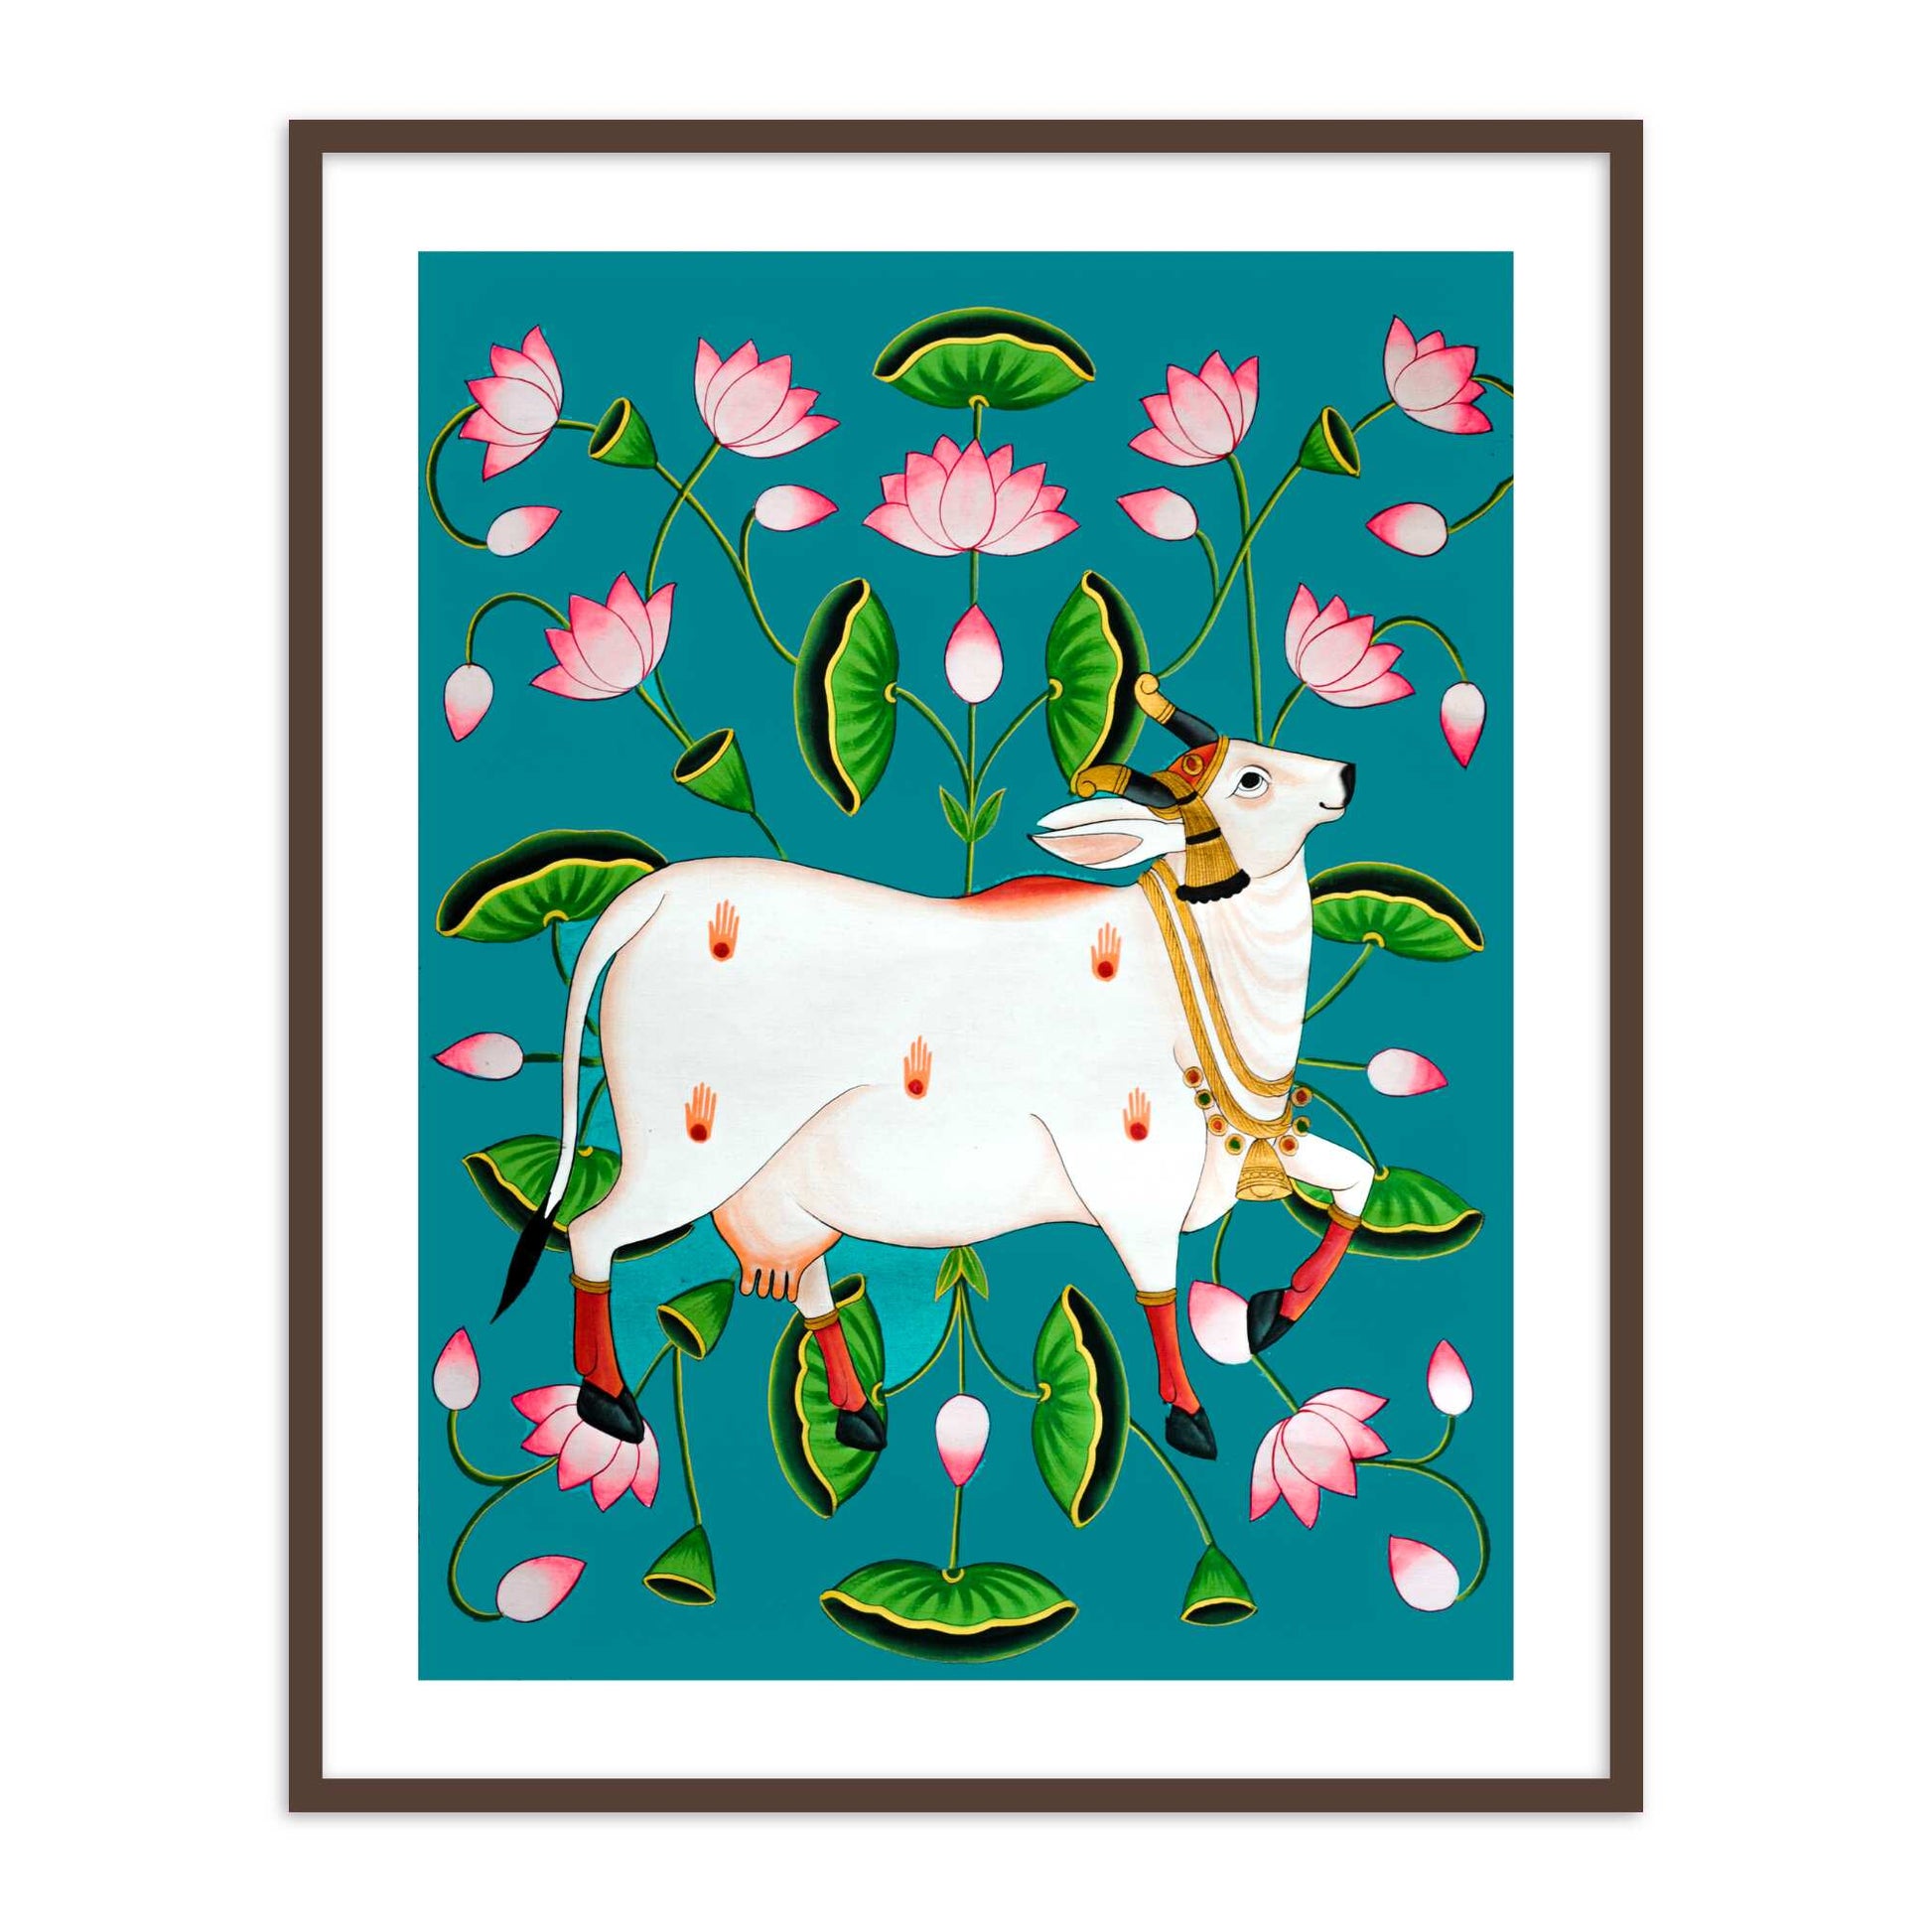 Buy Online Beautiful Pichwai Cow Painting | ContemporaryPichwai Painting | Wall Art for Home decor